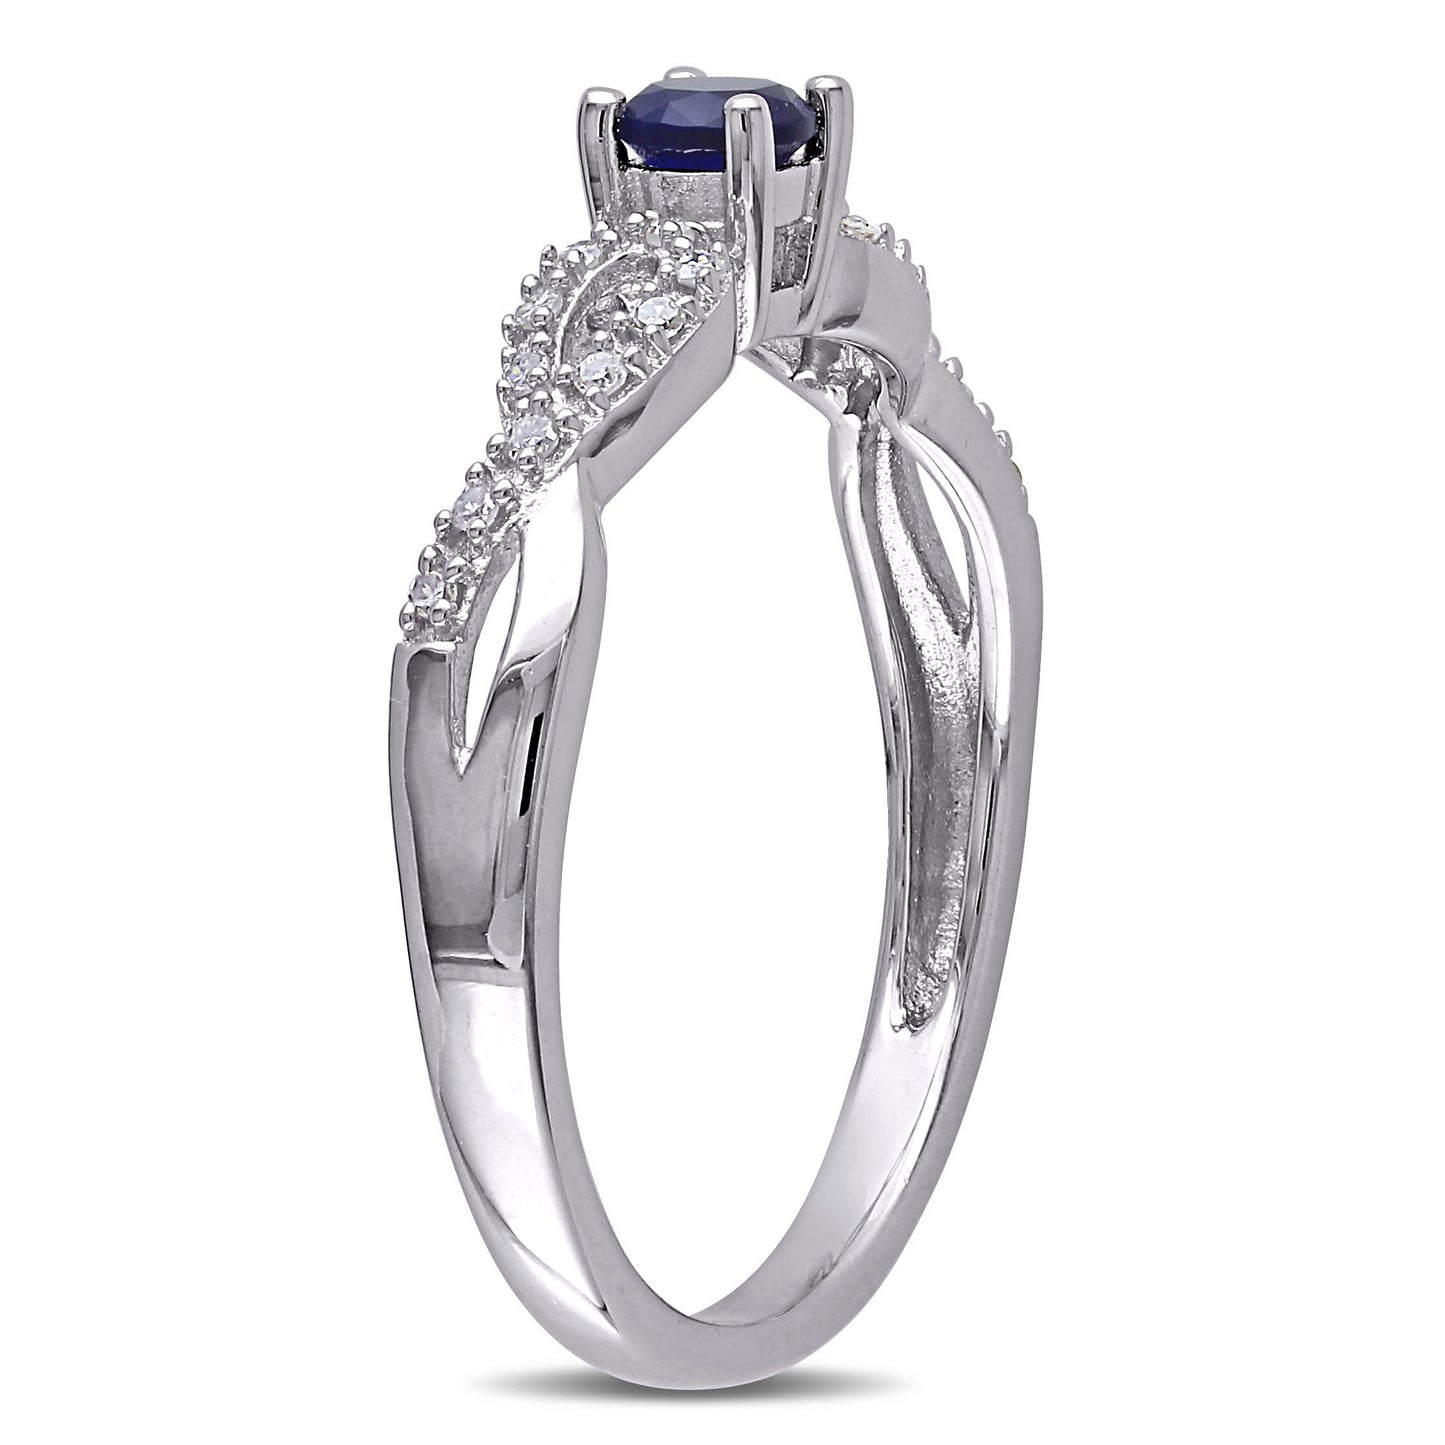 Sapphire  & Diamond Infinity Ring in Sterling Silver